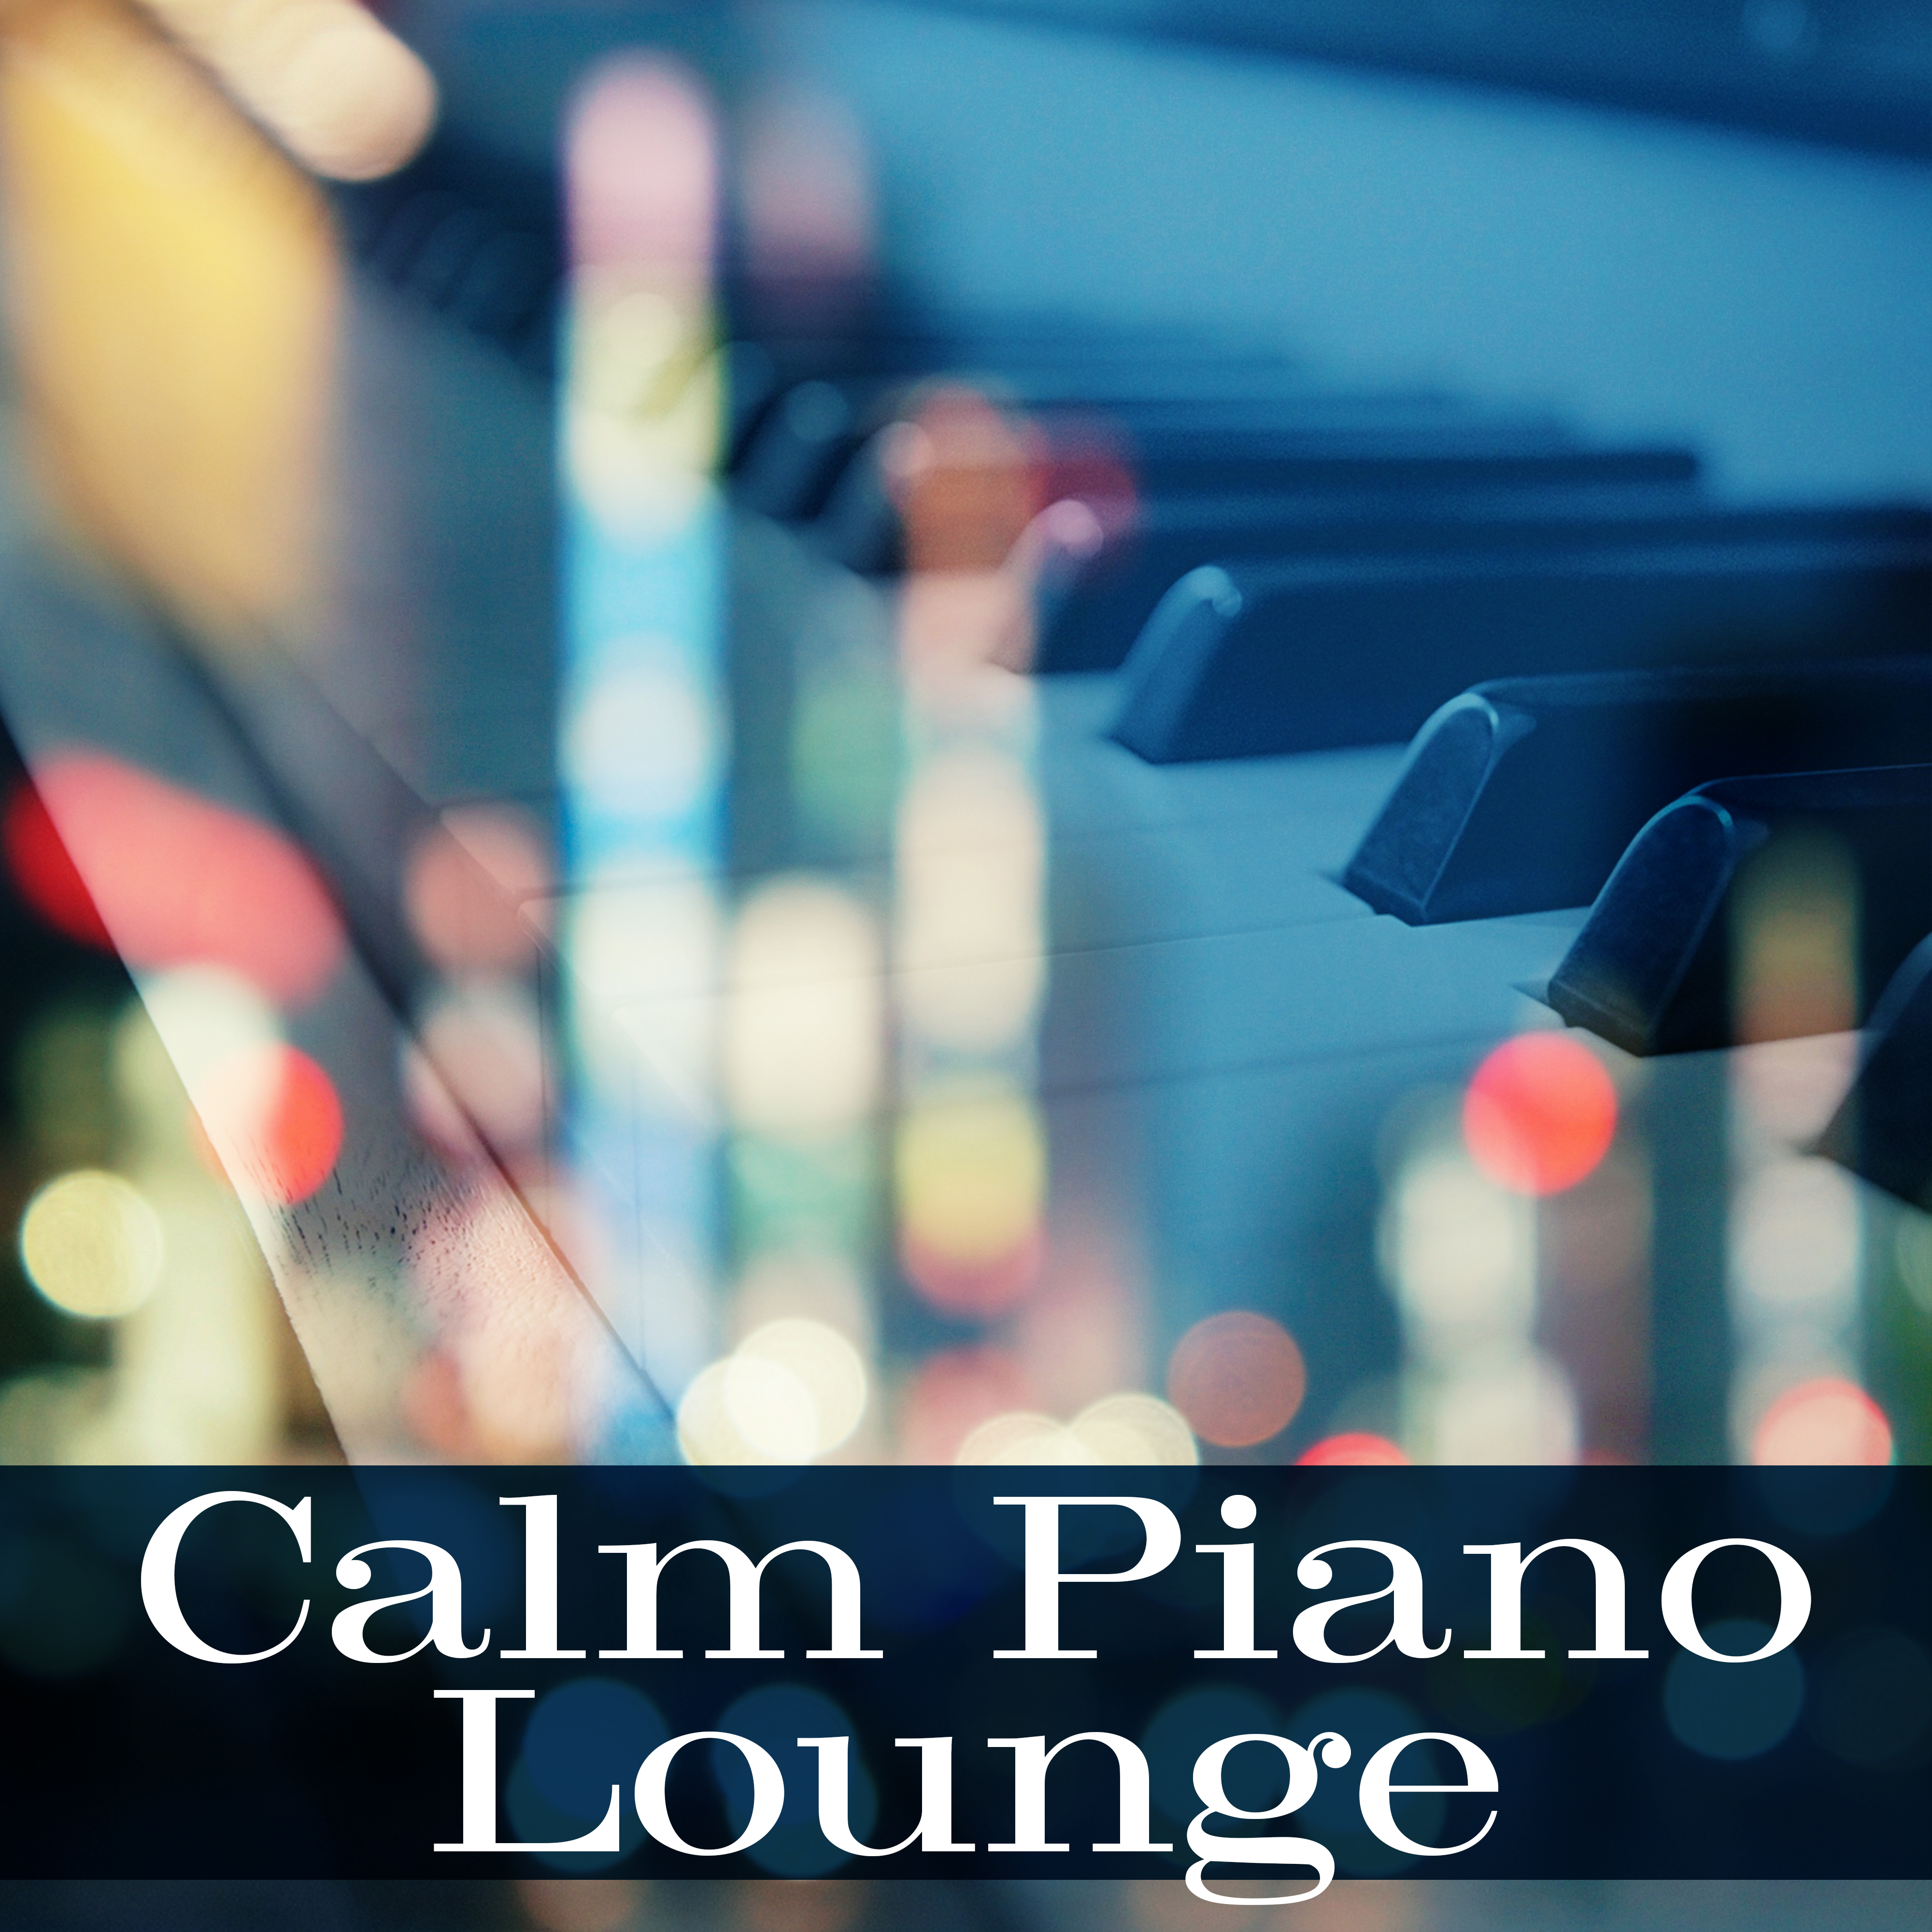 Calm Piano Lounge  Jazz Instrumental Ambient Music, Mellow Jazz Sounds, Relaxed Piano